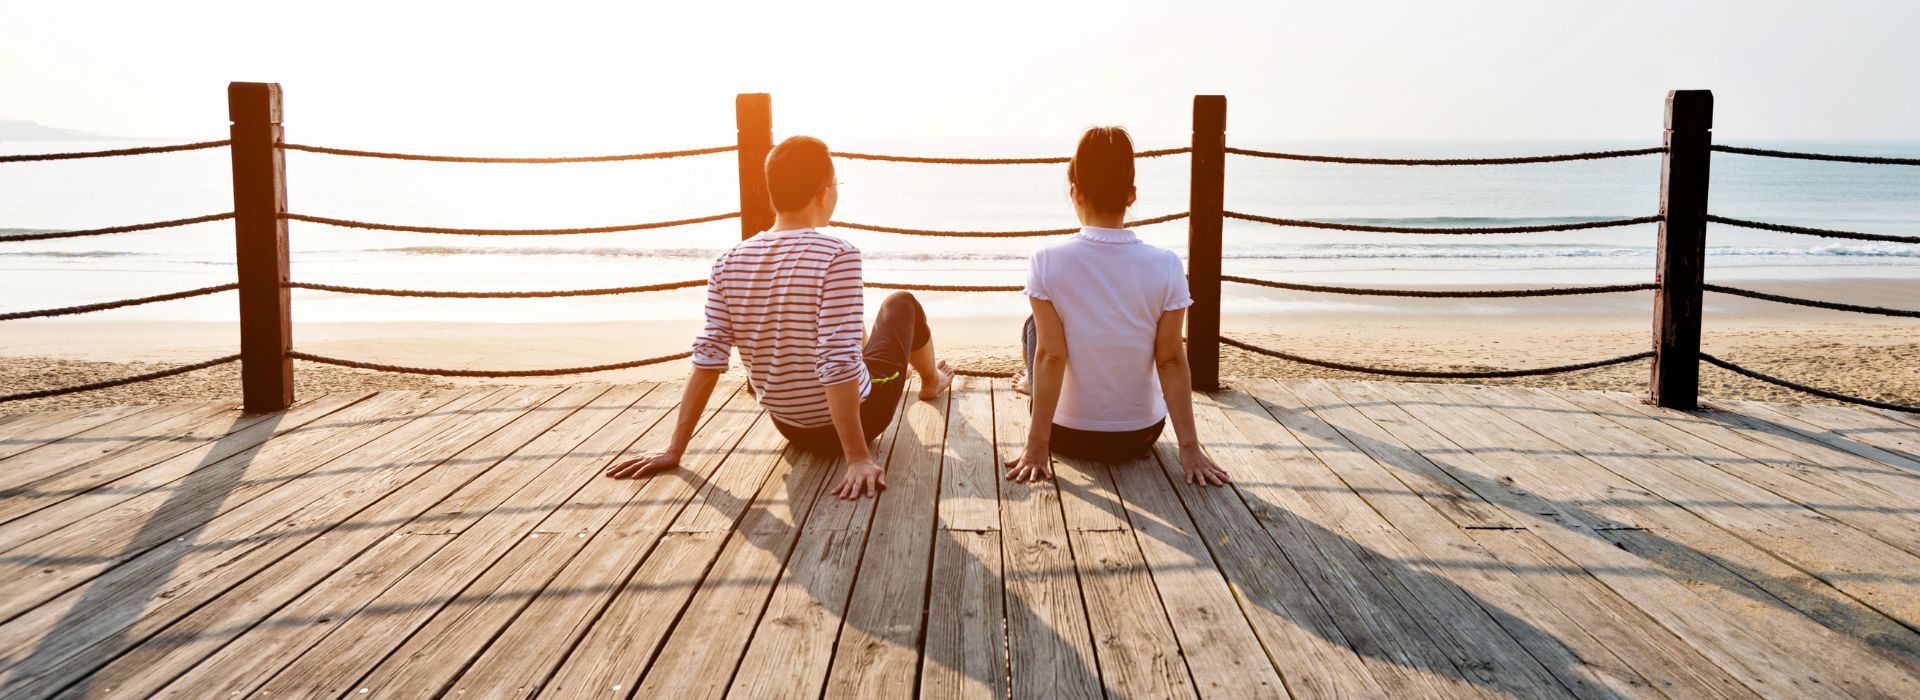 A couple is sitting on a boardwalk overlooking the water